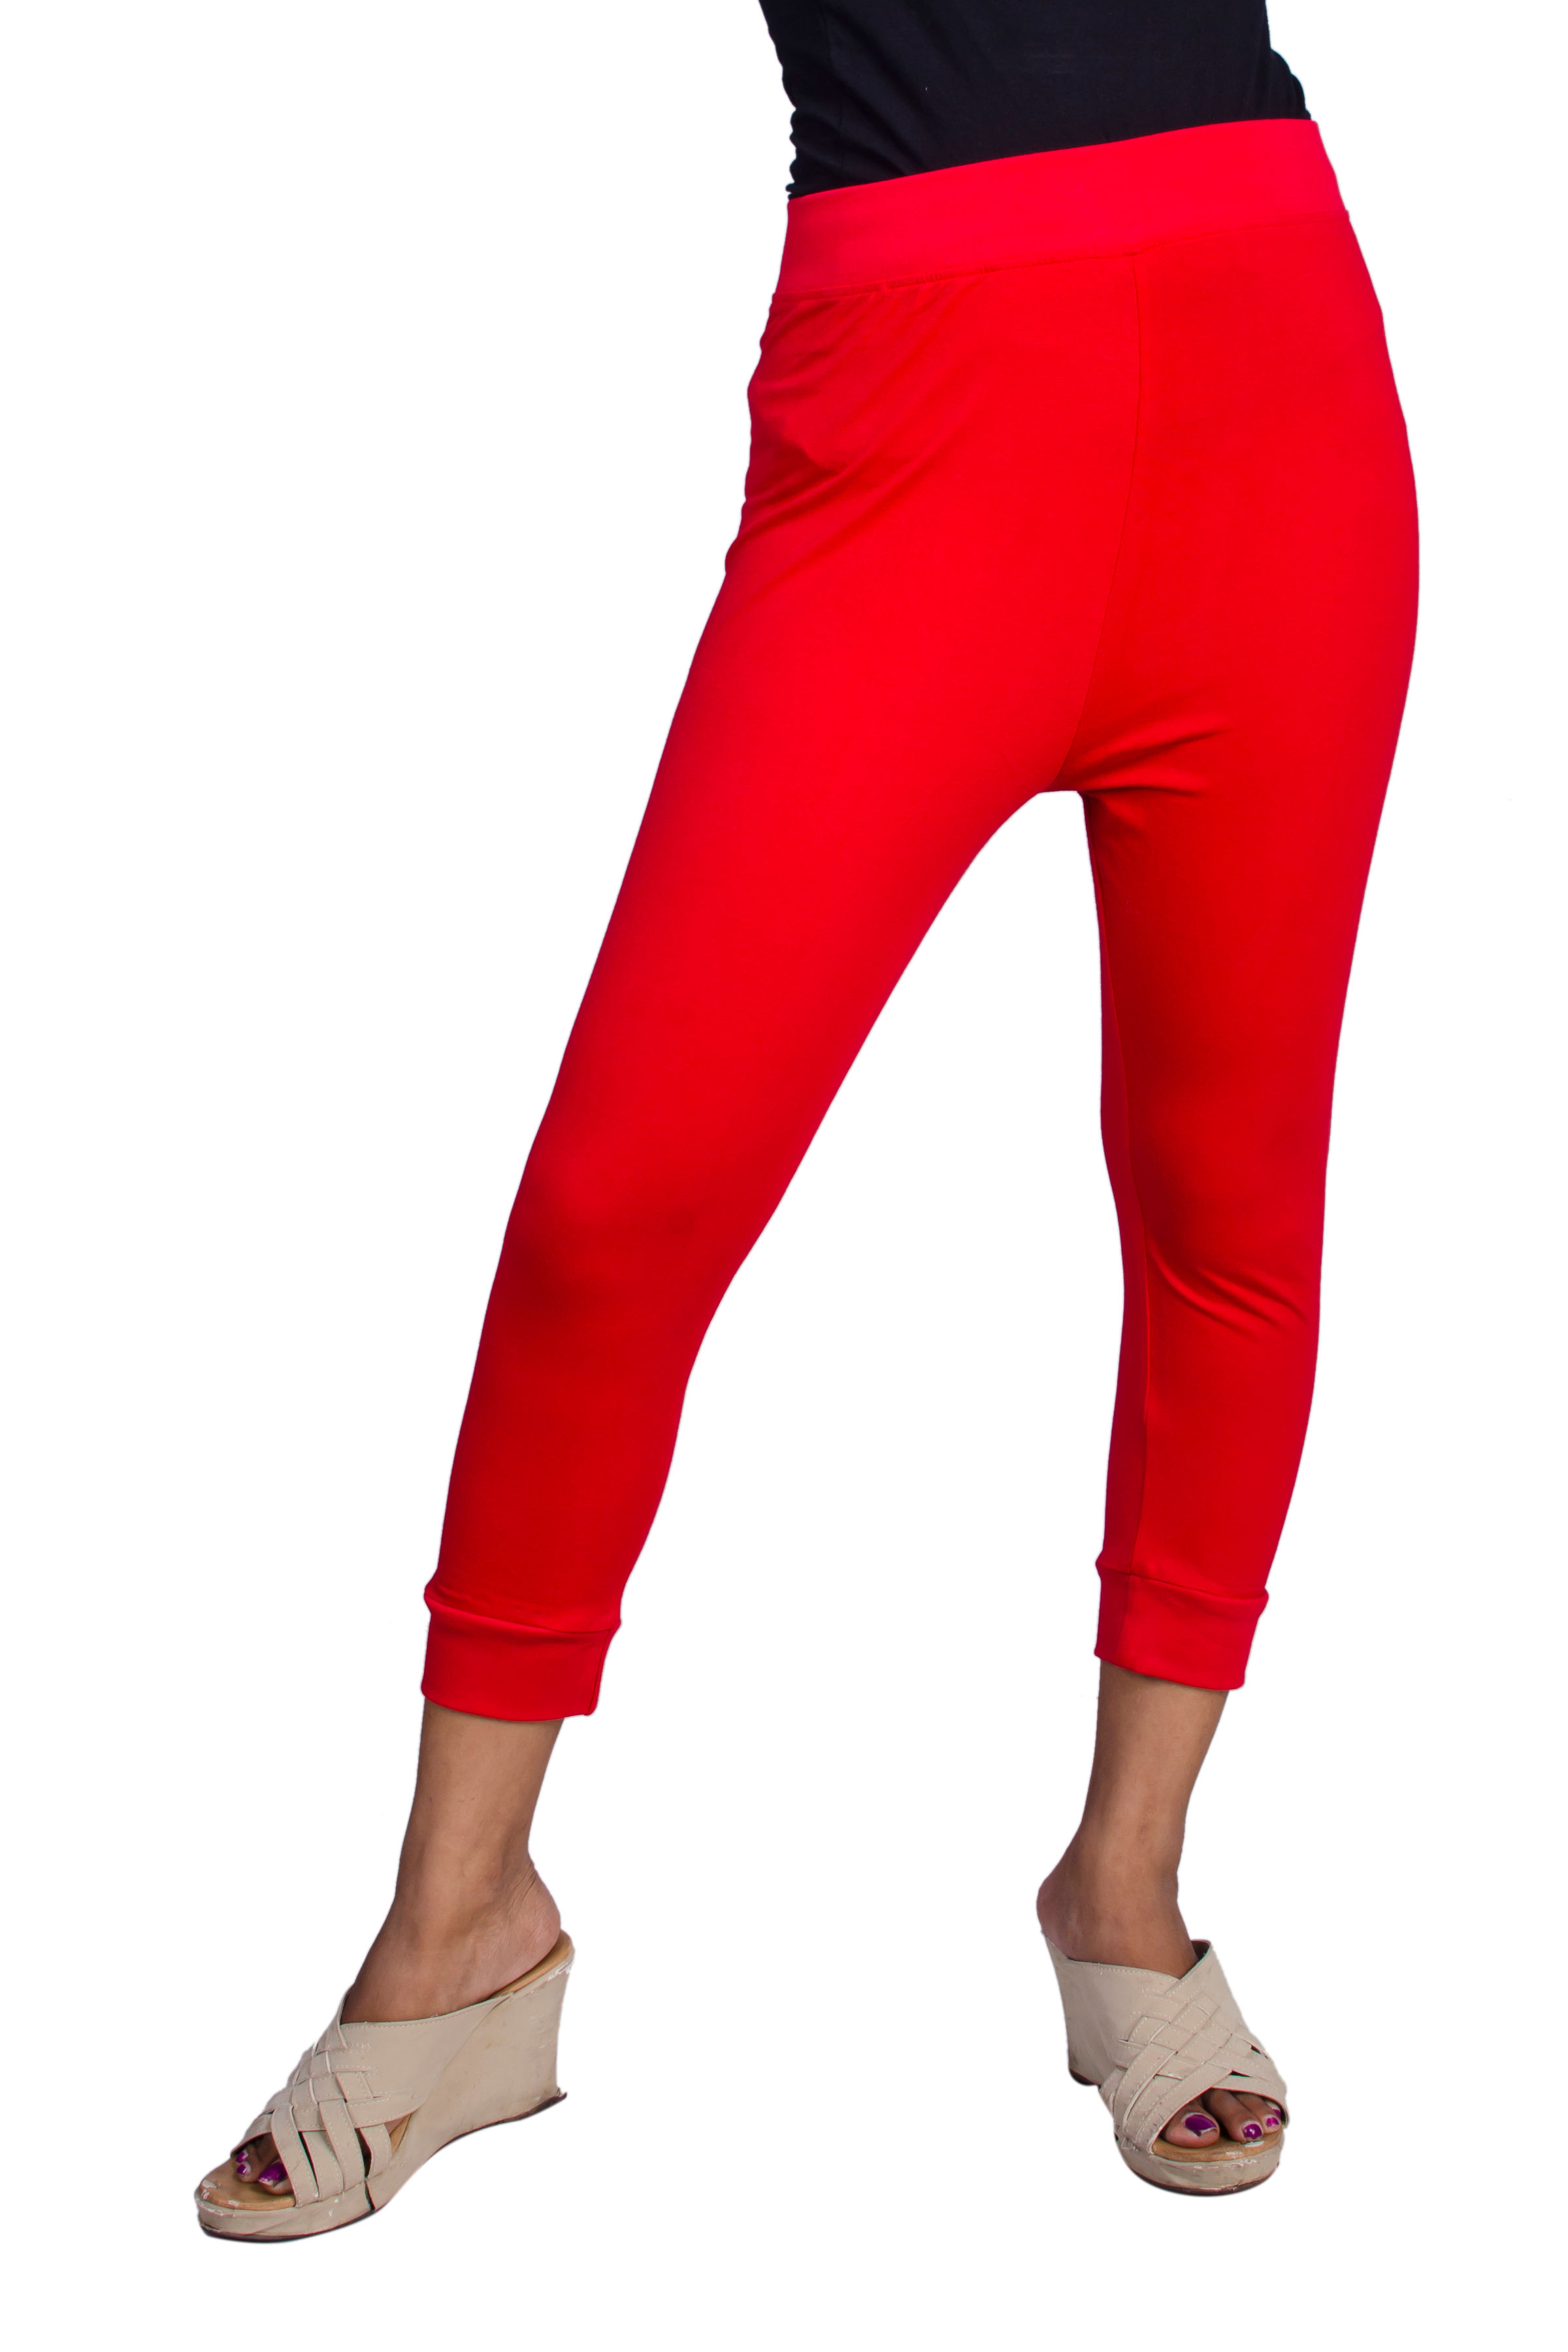 Yoga Pants Manufacturers India  International Society of Precision  Agriculture